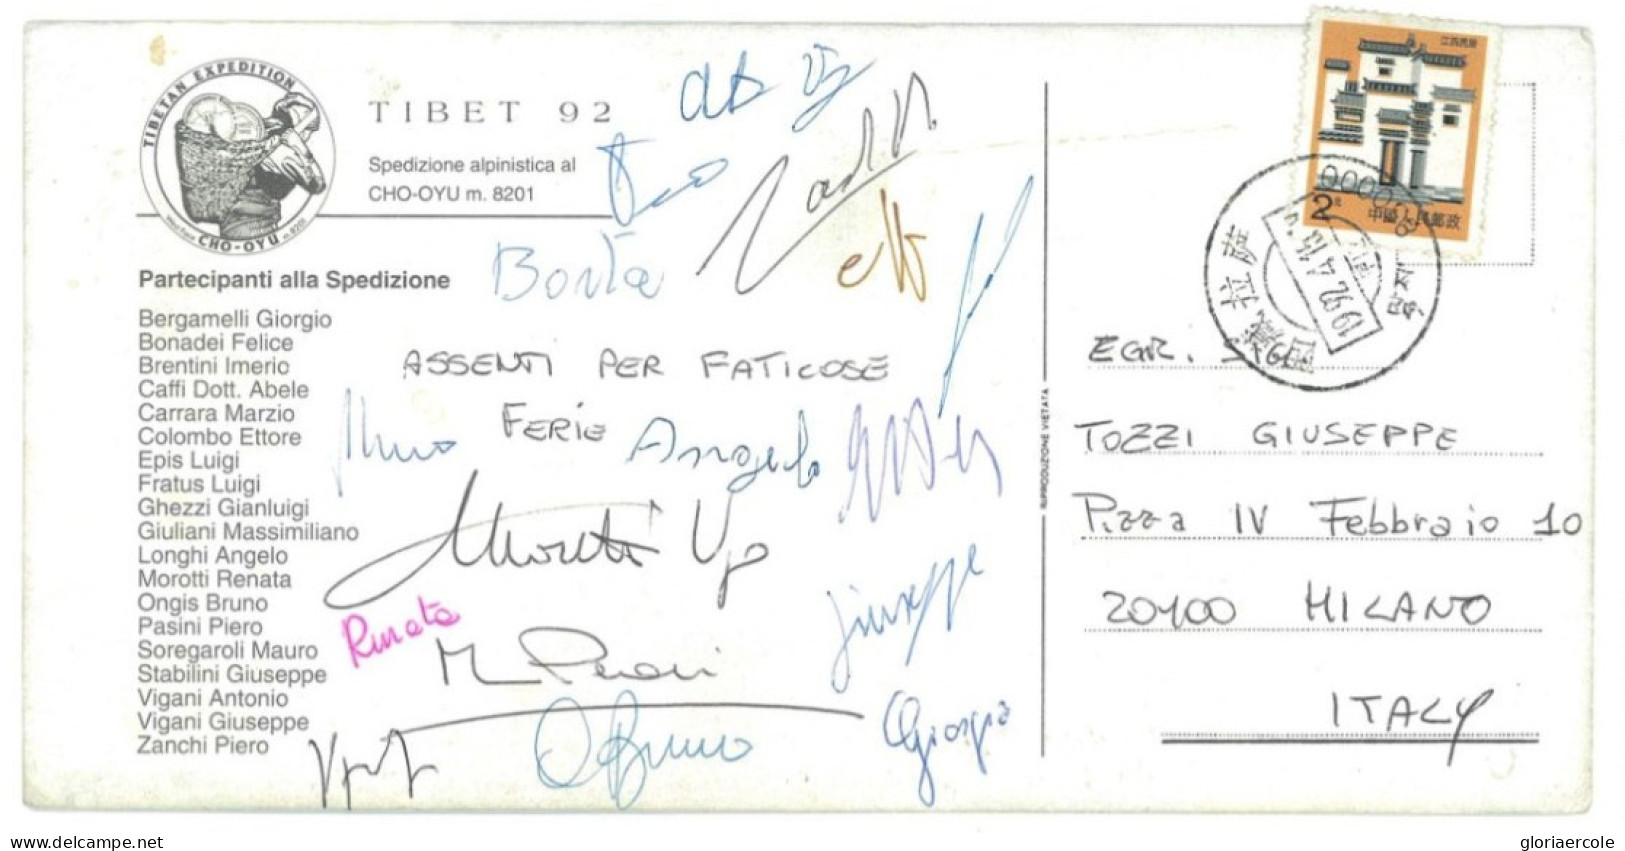 P2834 - MOUNTANEERING, ITALIAN EXPEDITION TO THE CHO-OYU TIBET 1992 SIGNED BY MOST OF THE MEMBERS. - Arrampicata